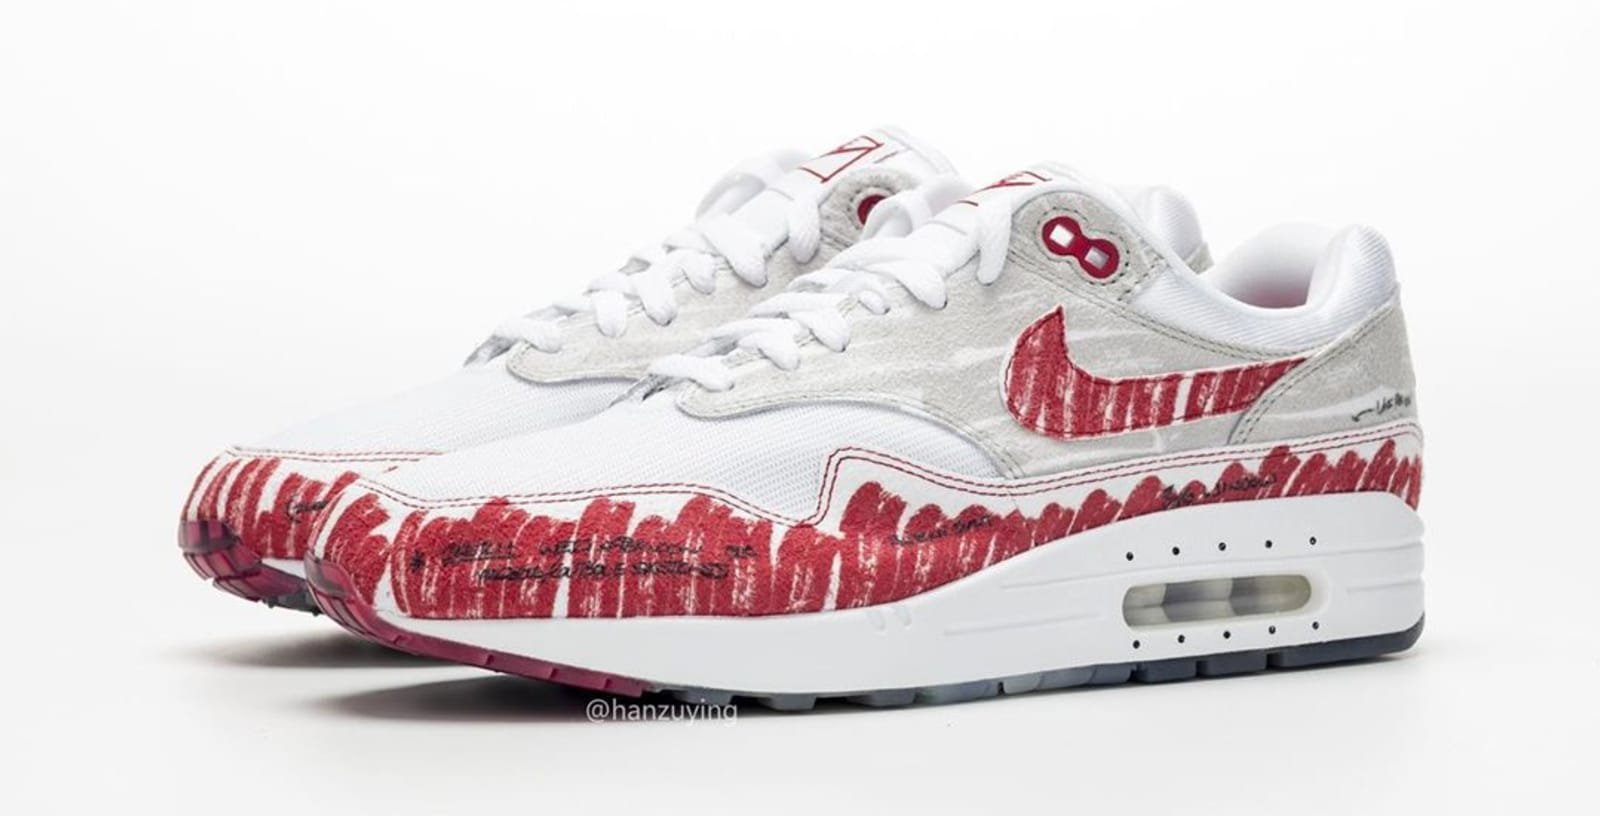 Nike Air Max 1 &quot;Sketch To Shelf&quot; Pack Drops This Weekend: Details